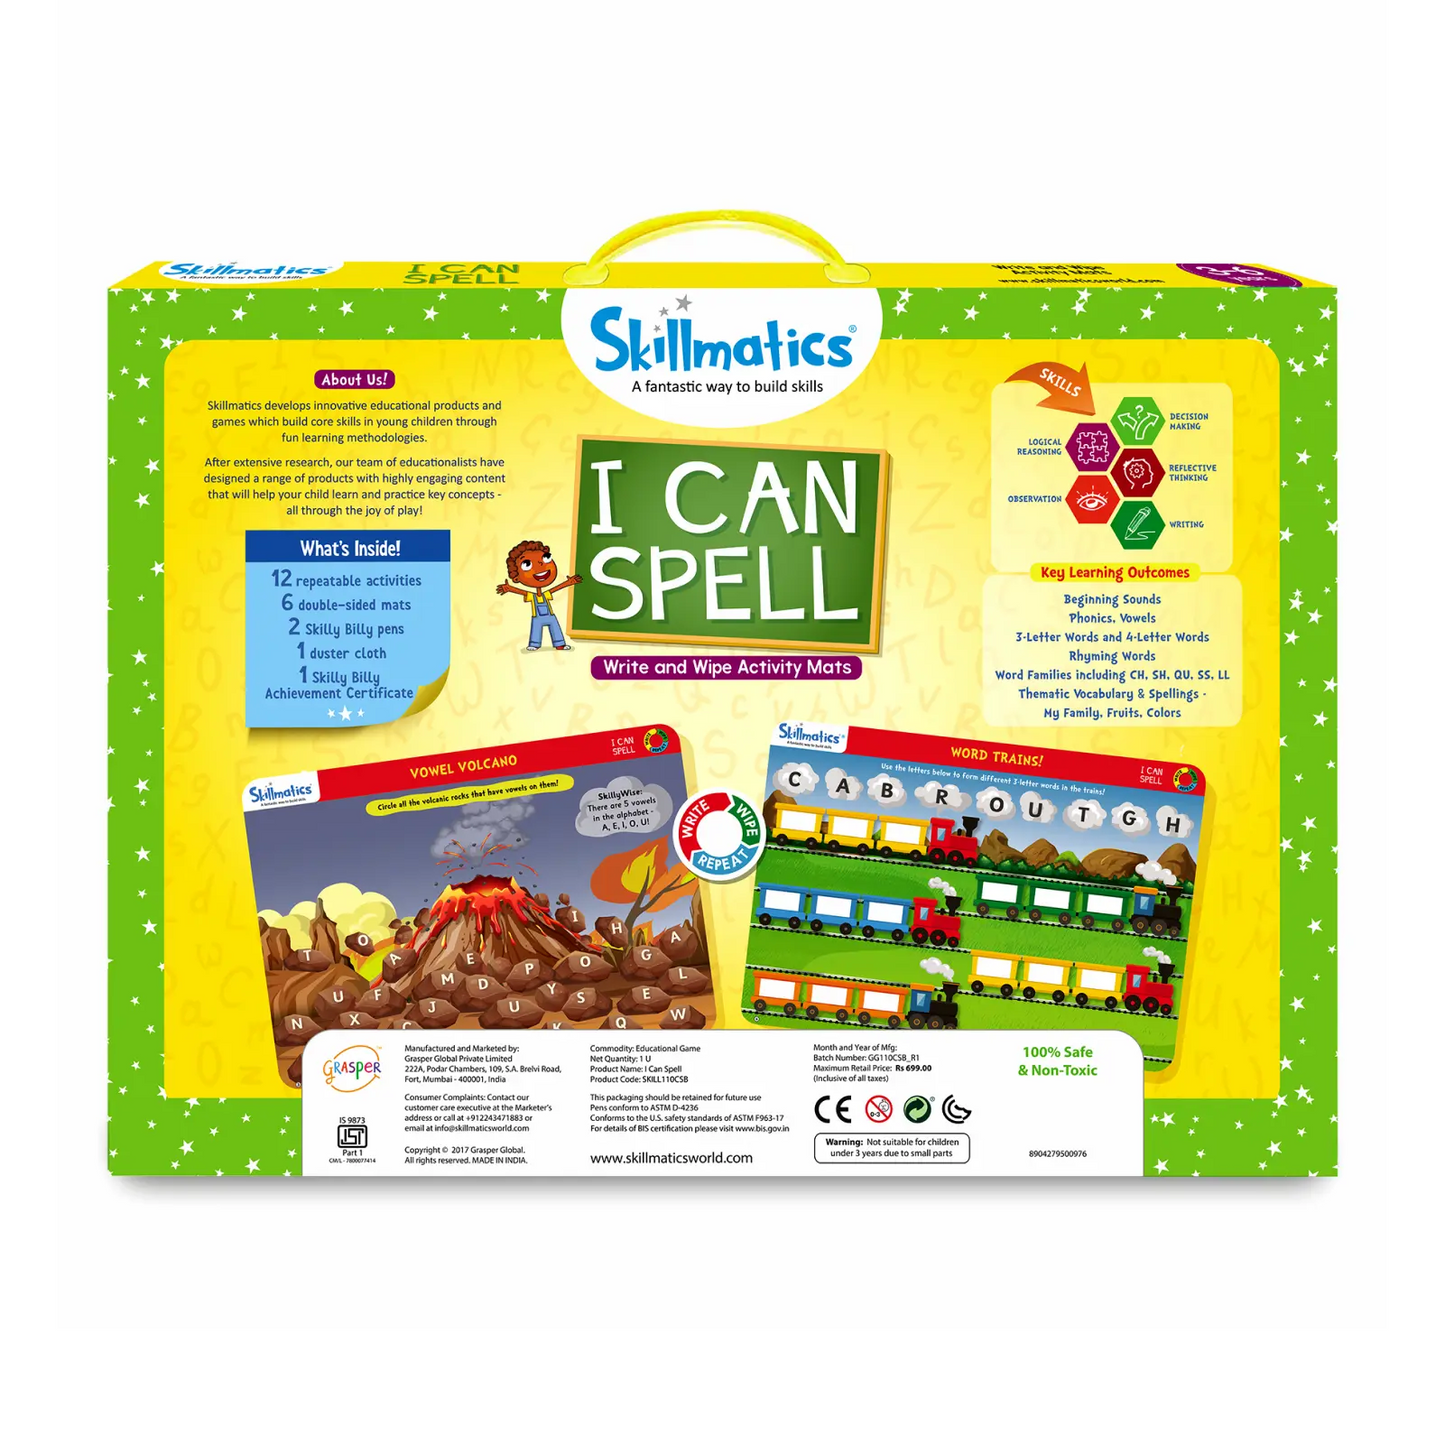 I Can Spell | Reusable Activity Mats (ages 3-6)